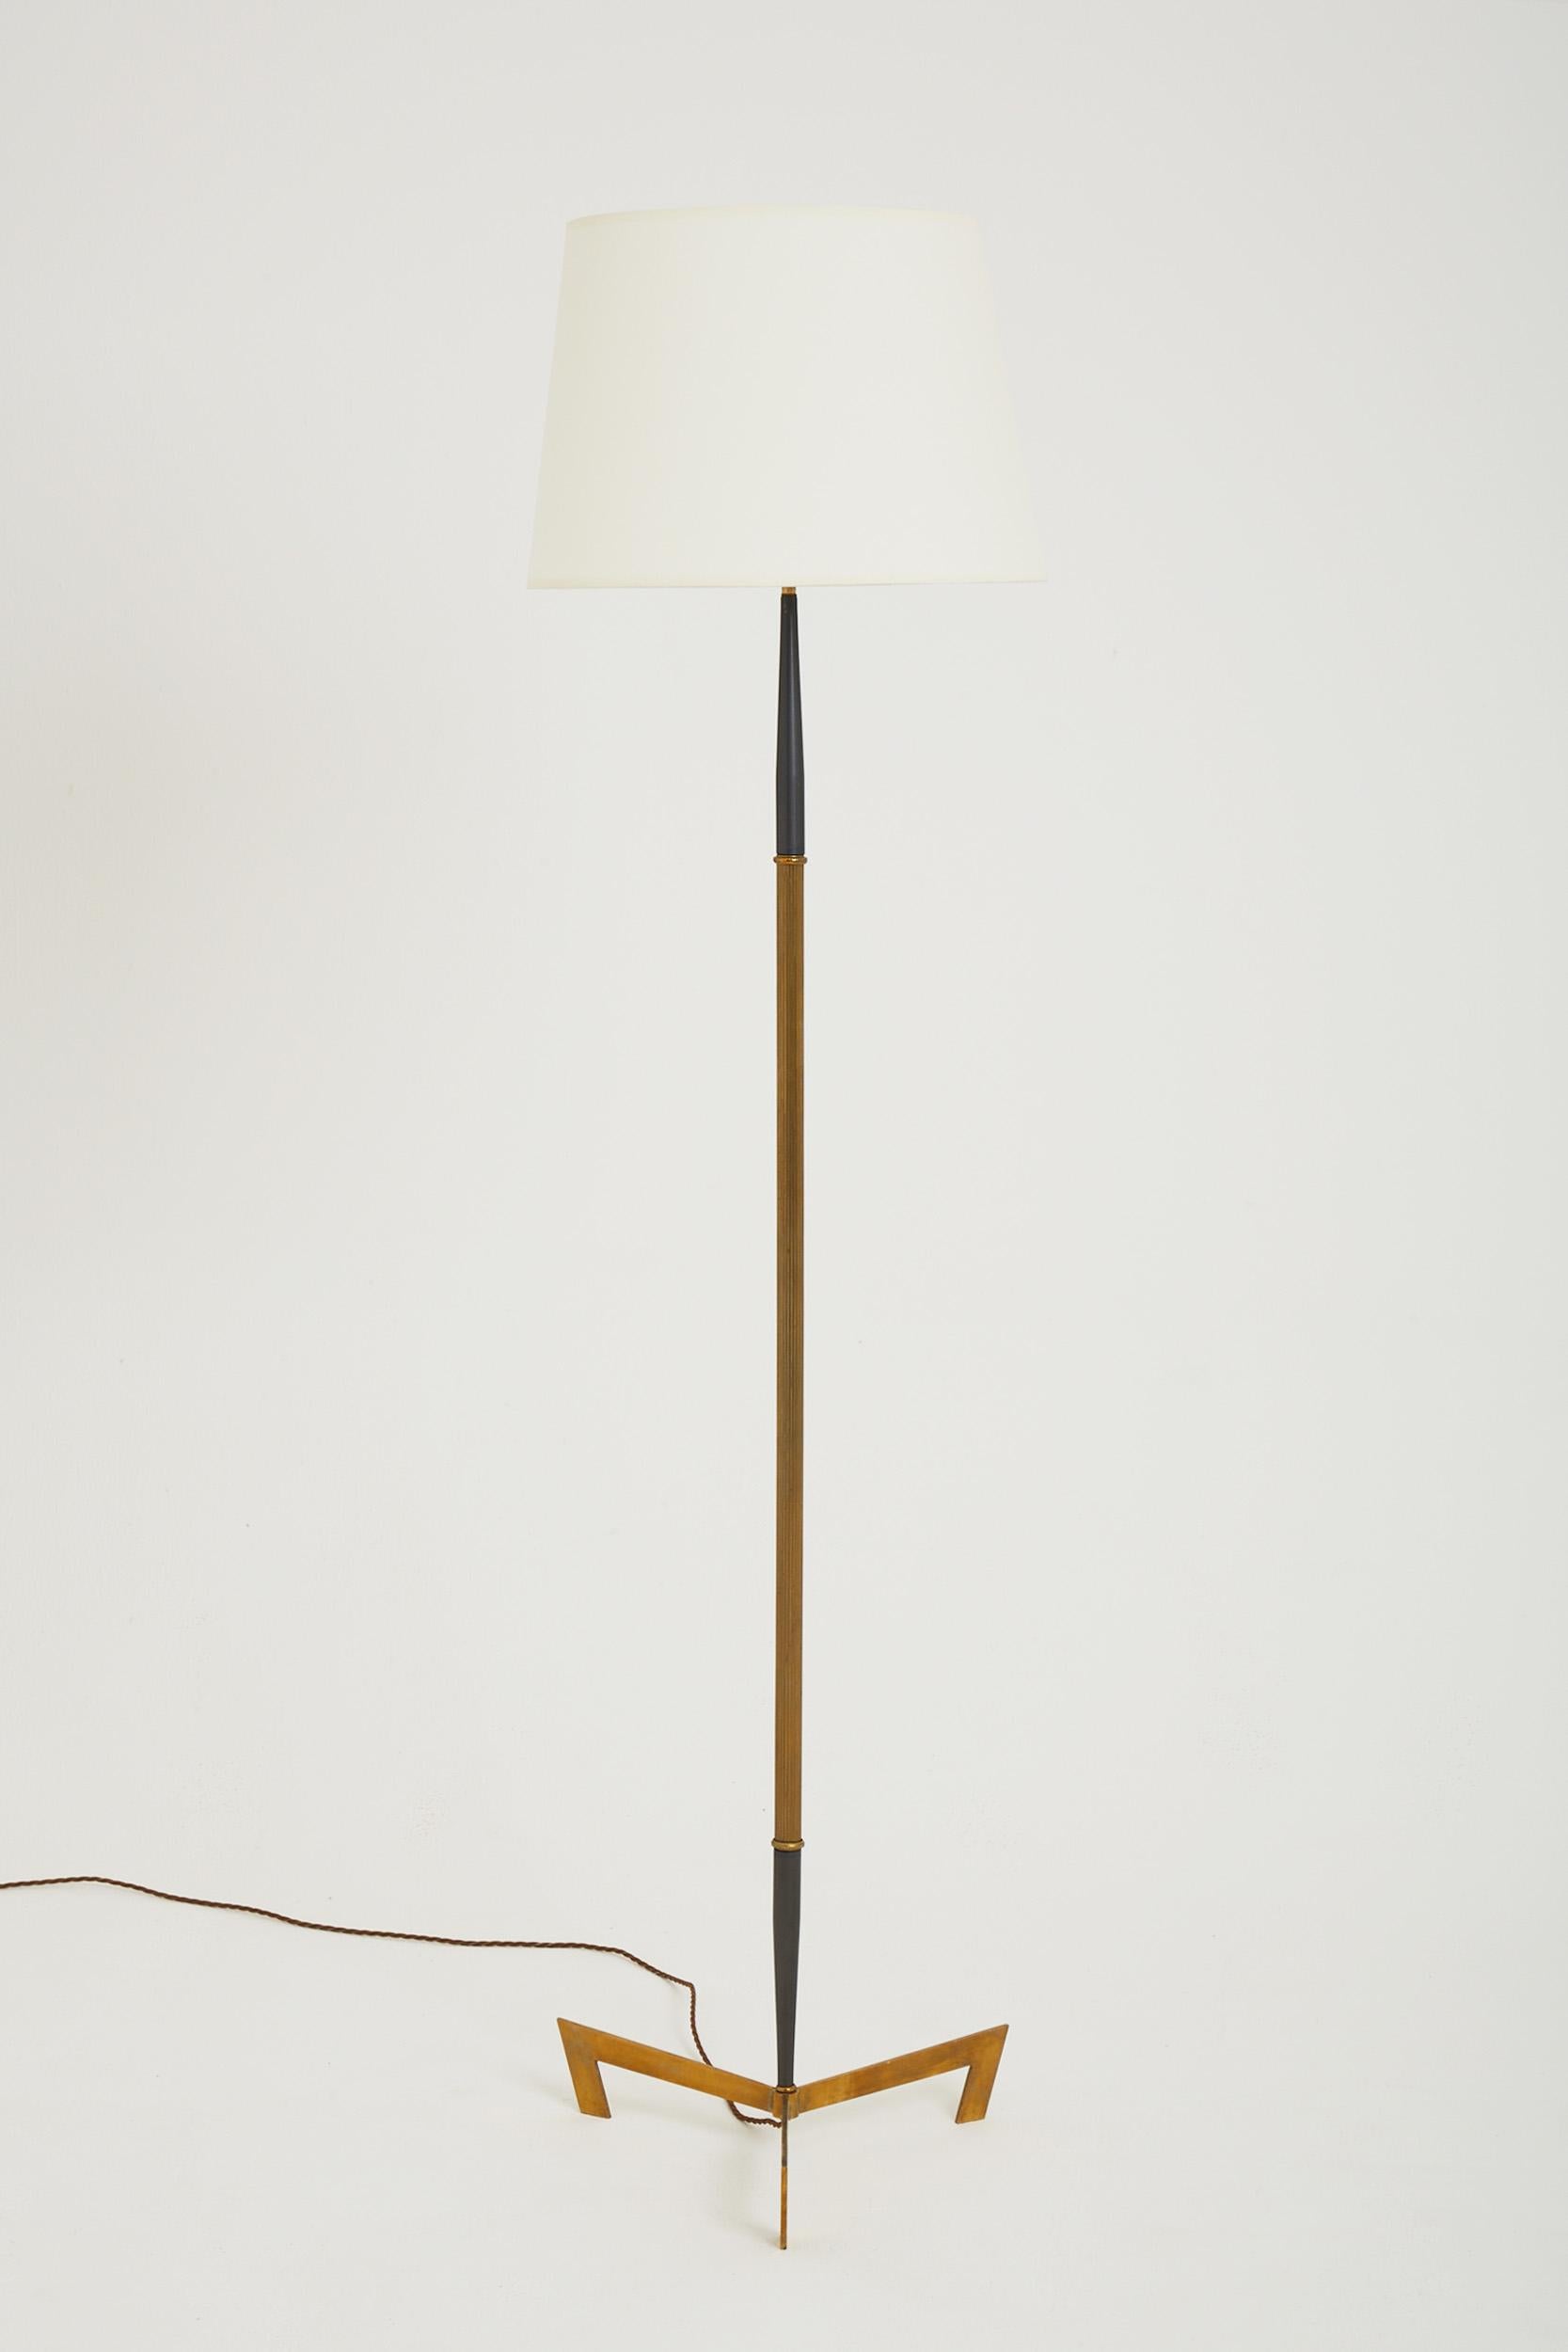 A brass and gunmetal floor lamp, on a tripod base.
France, Circa 1950.
With the shade: 176 cm high by 46 cm diameter.
Lamp base only: 150 cm high by 44 cm diameter.